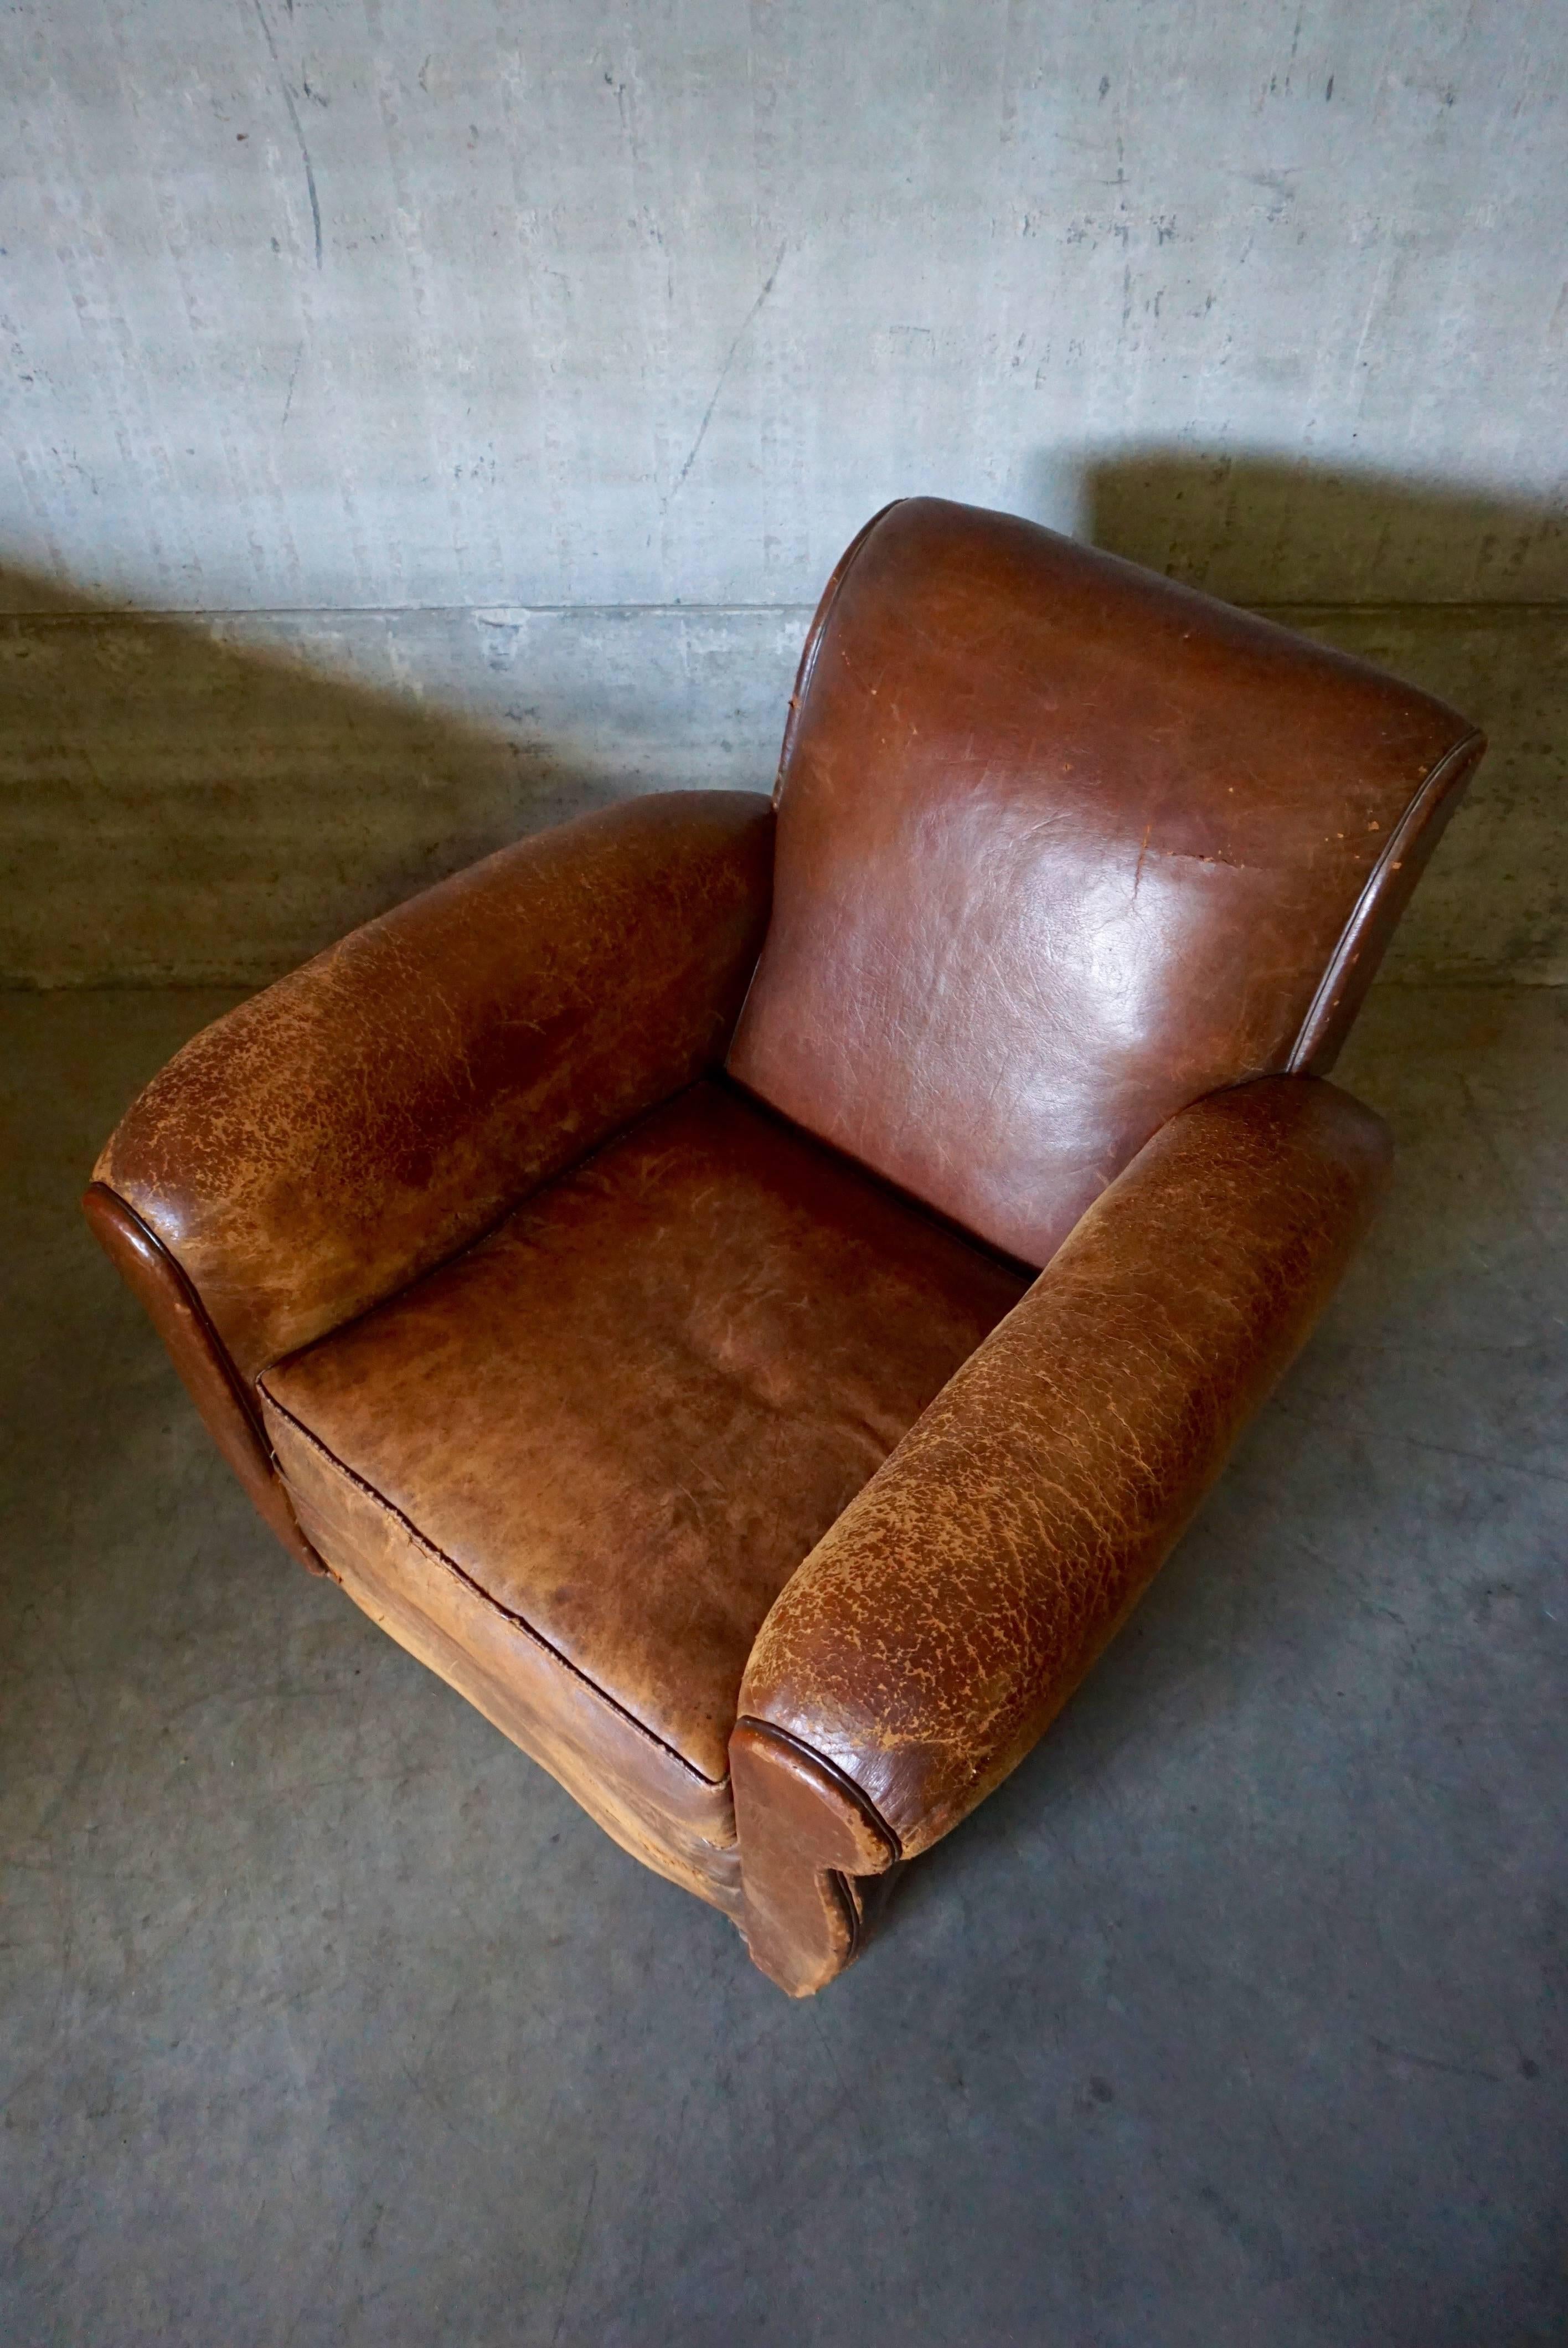 This club chair was designed and produced in France during the 1930s. The chair is made from cognac leather held together with metal pins and mounted on wooden legs. The lounge chair remains in a good vintage distressed condition with signs of use